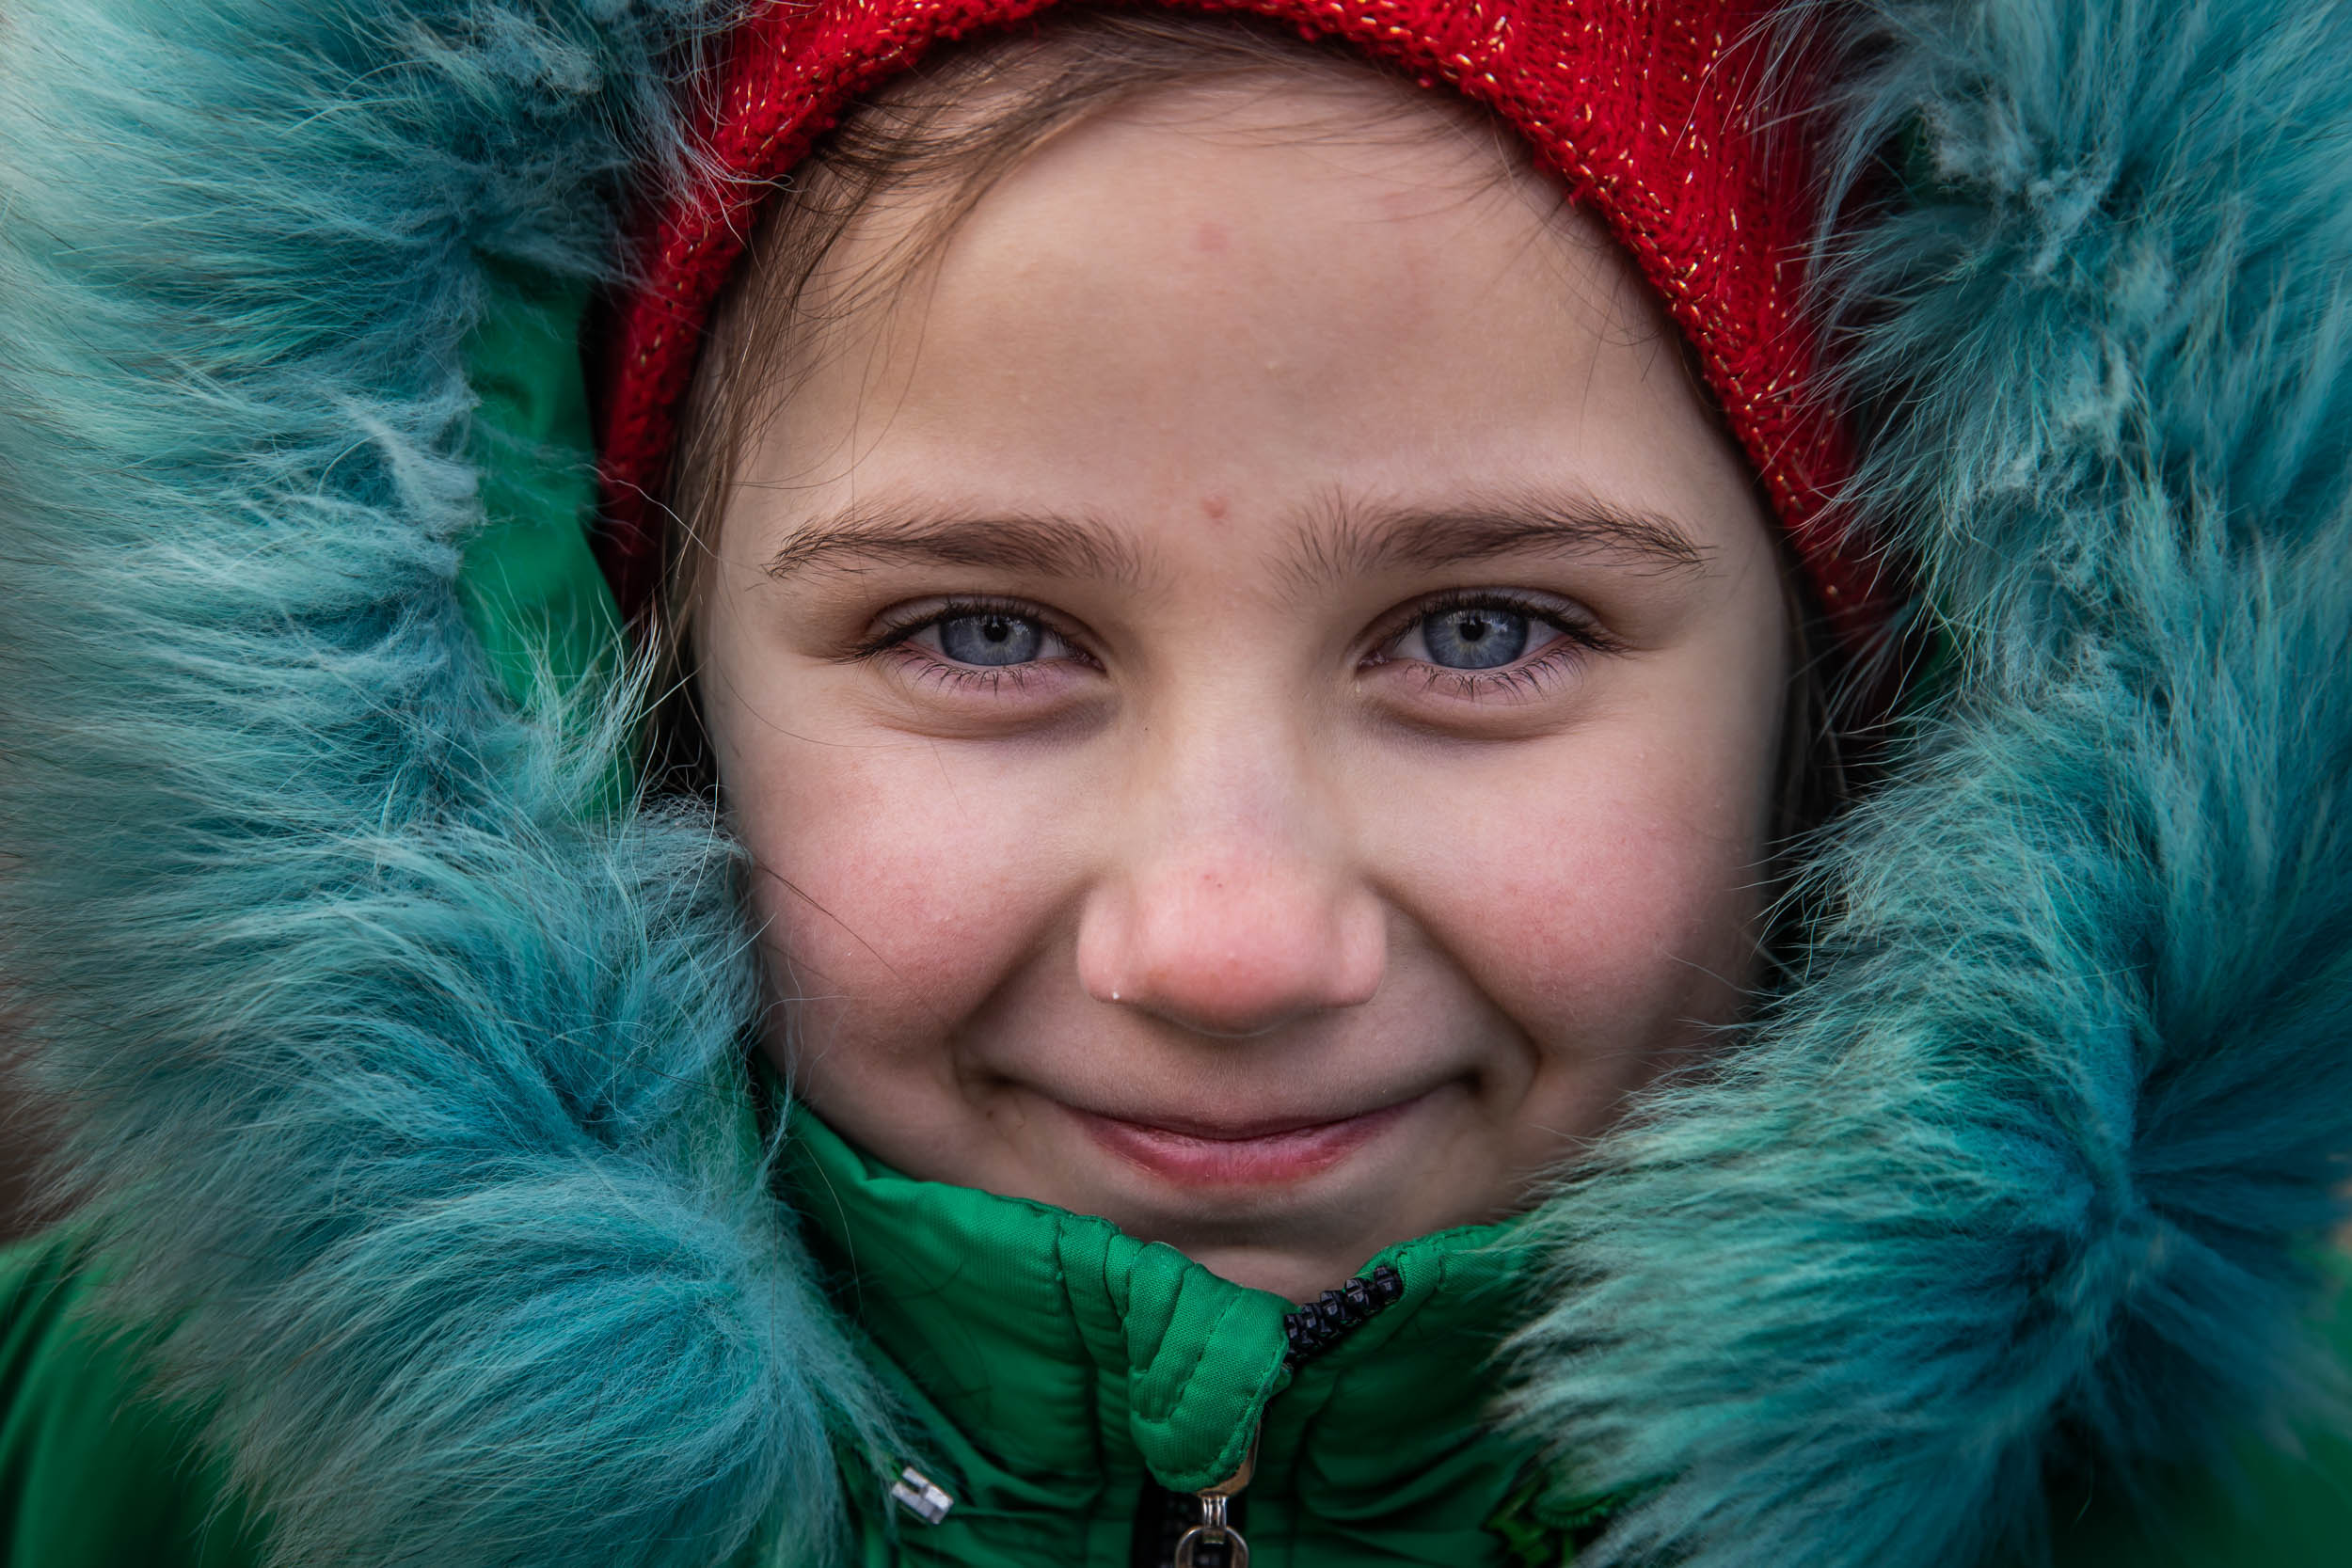 Leeza, age 10, offers a smile while waiting in freezing temperatures to board a bus that would evacuate her and others from the besieged city of Mykolaiv, Ukraine on March 10, 2022.